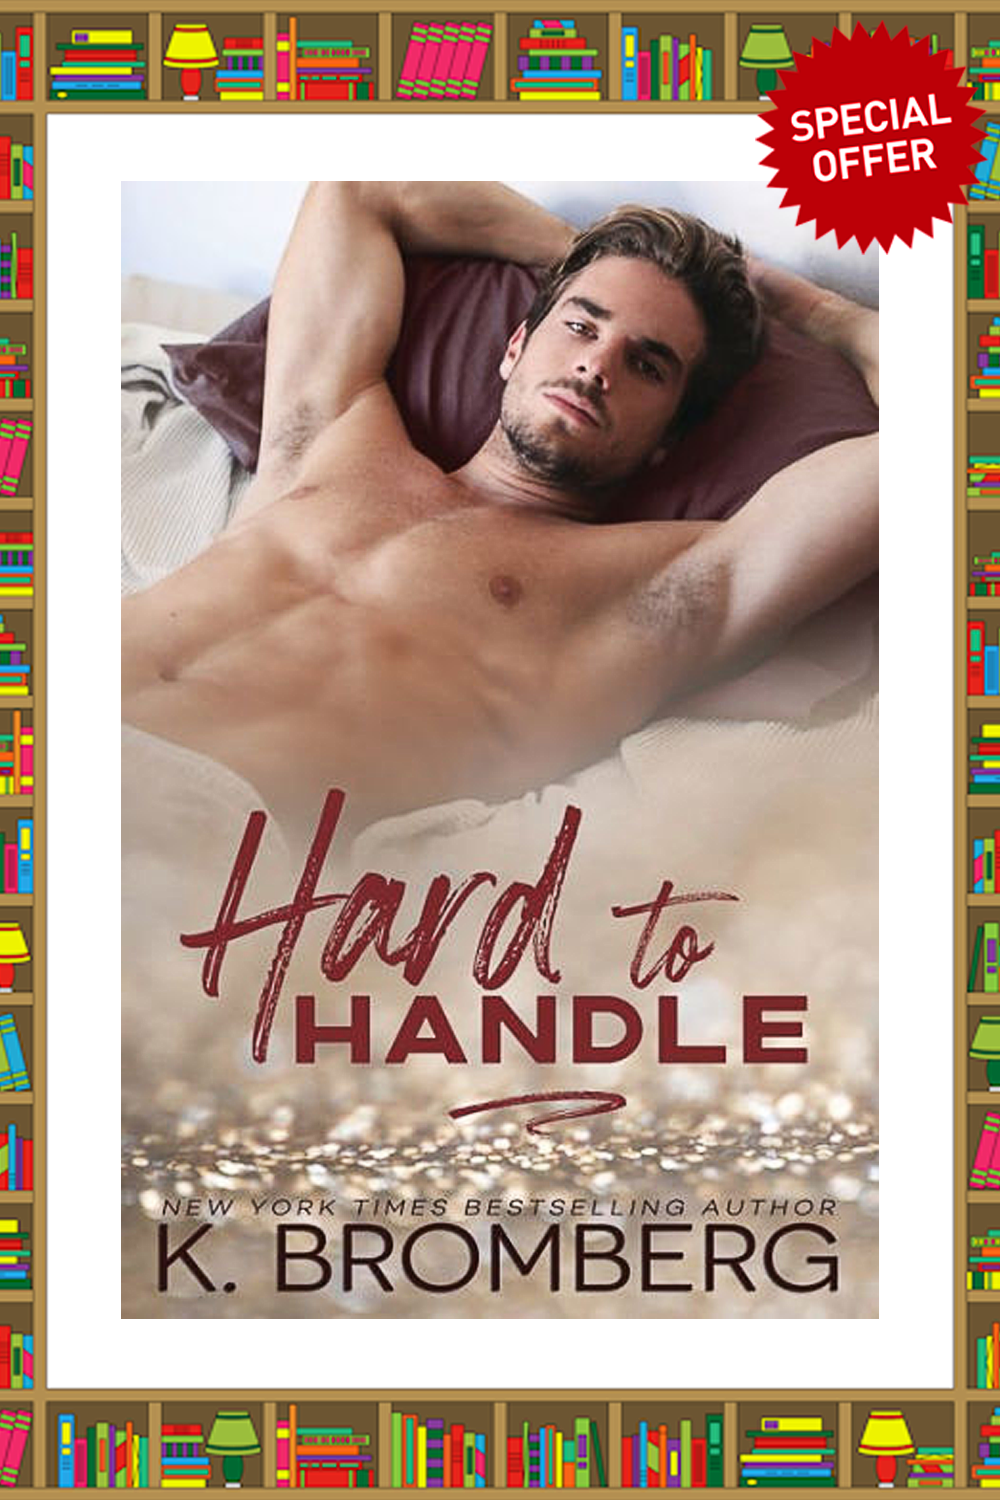 Hard to Handle (The Play Hard Series Book 1)